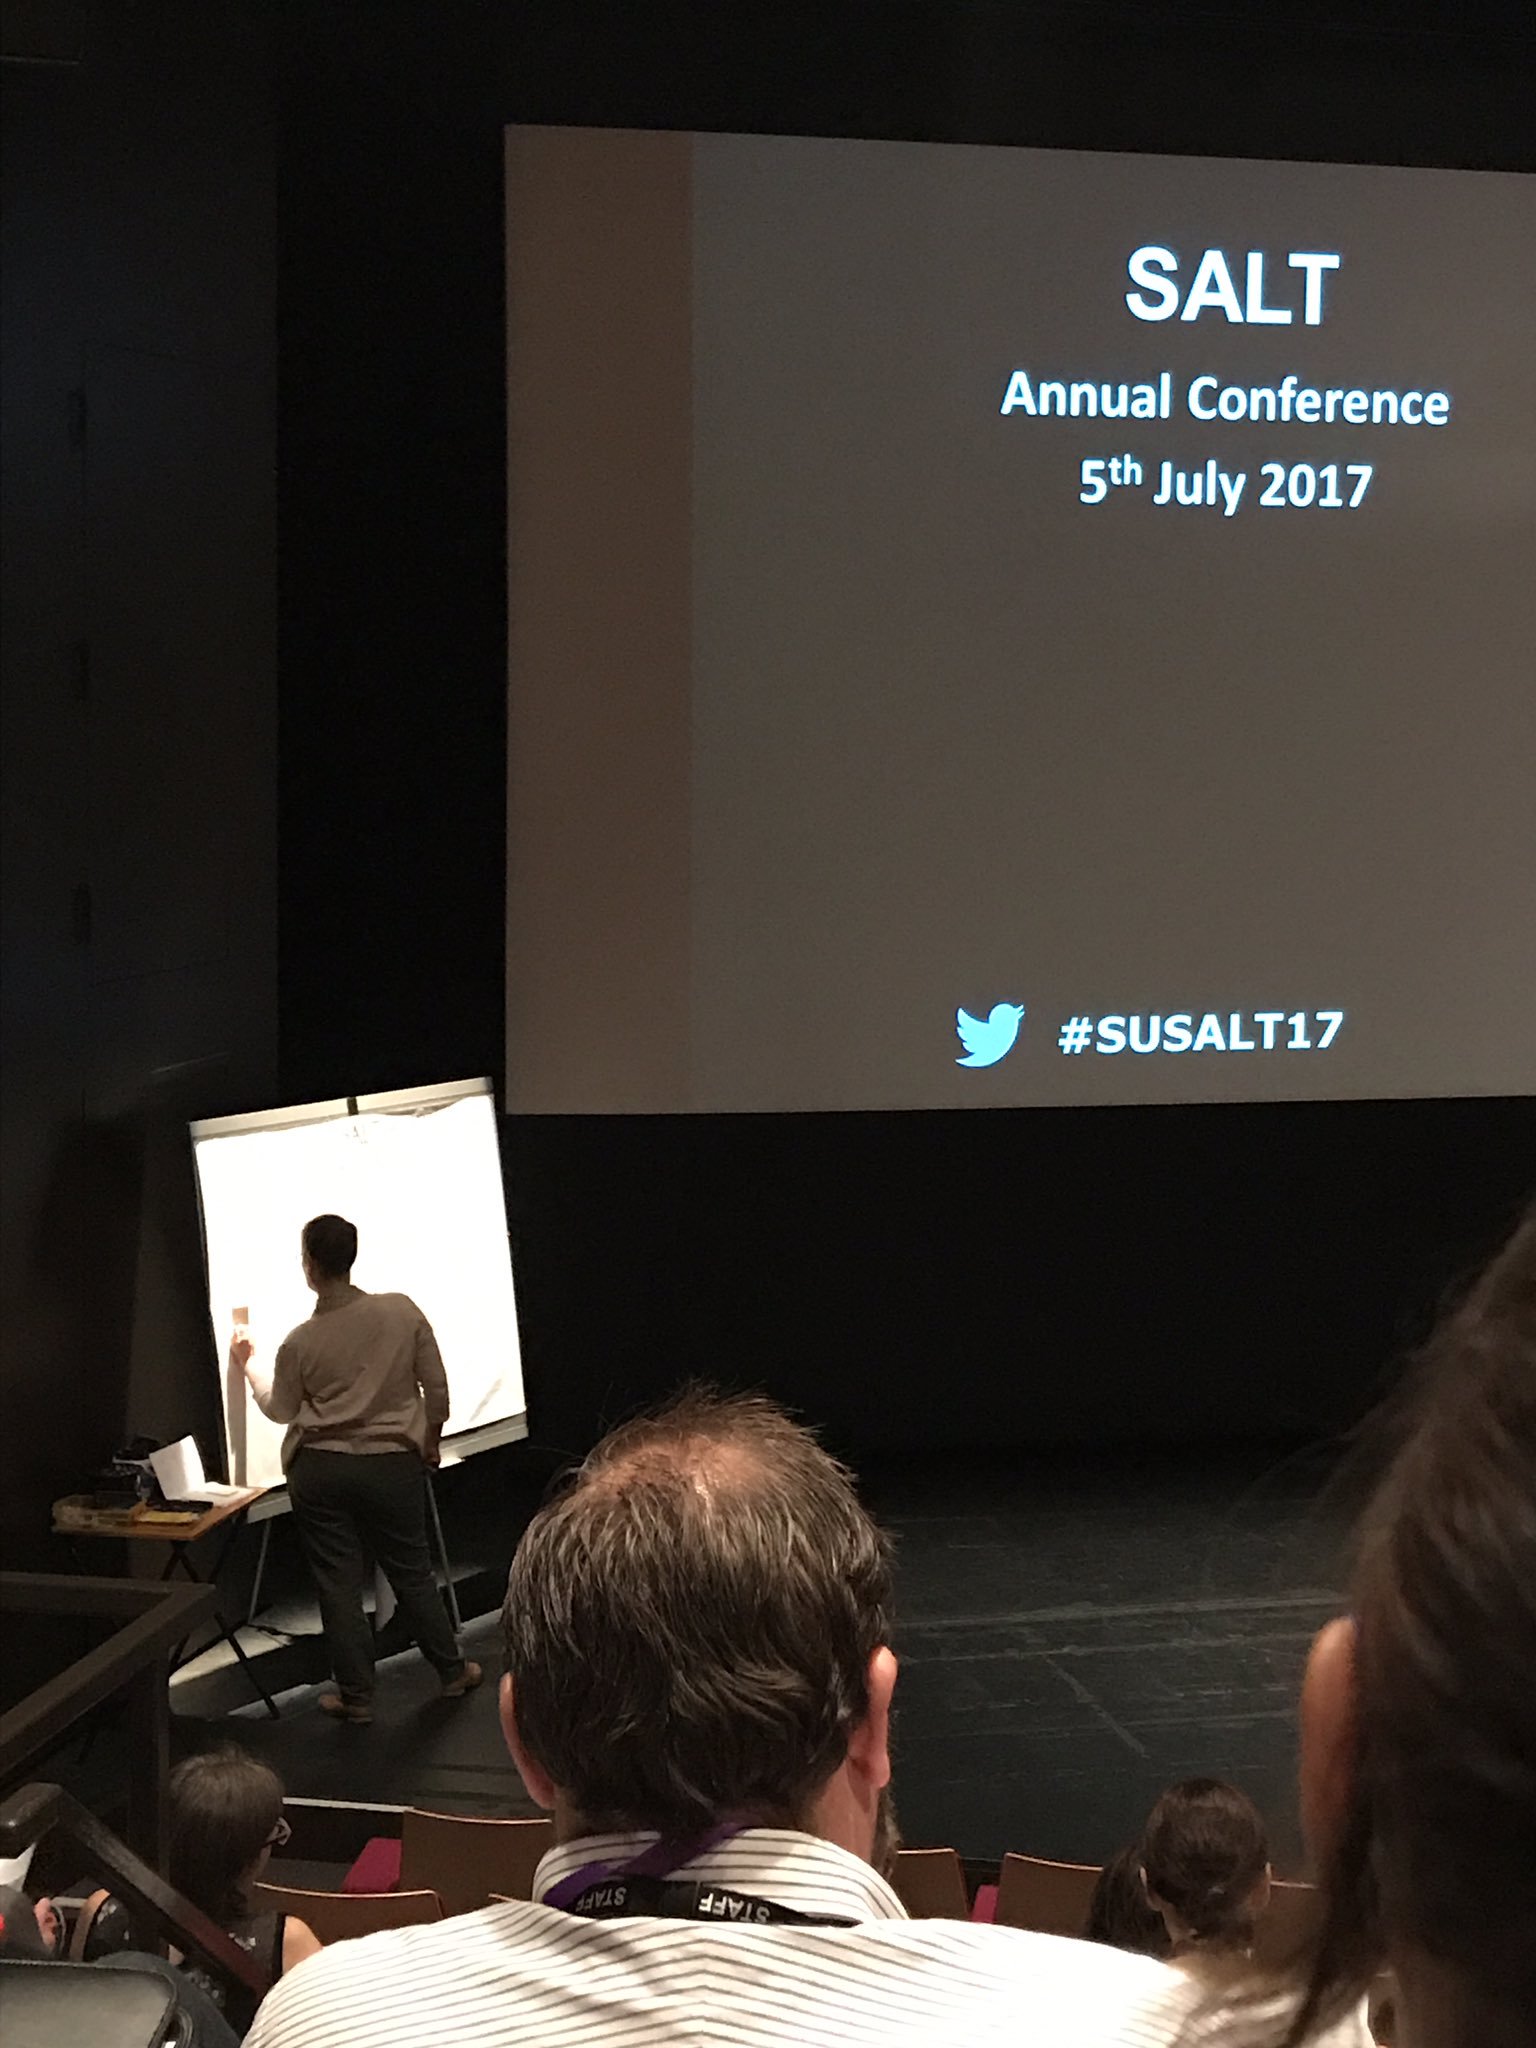 Looking forward to seeing what's on the graphic wall by the end of #SUSALT17 https://t.co/Hb5NFWllec